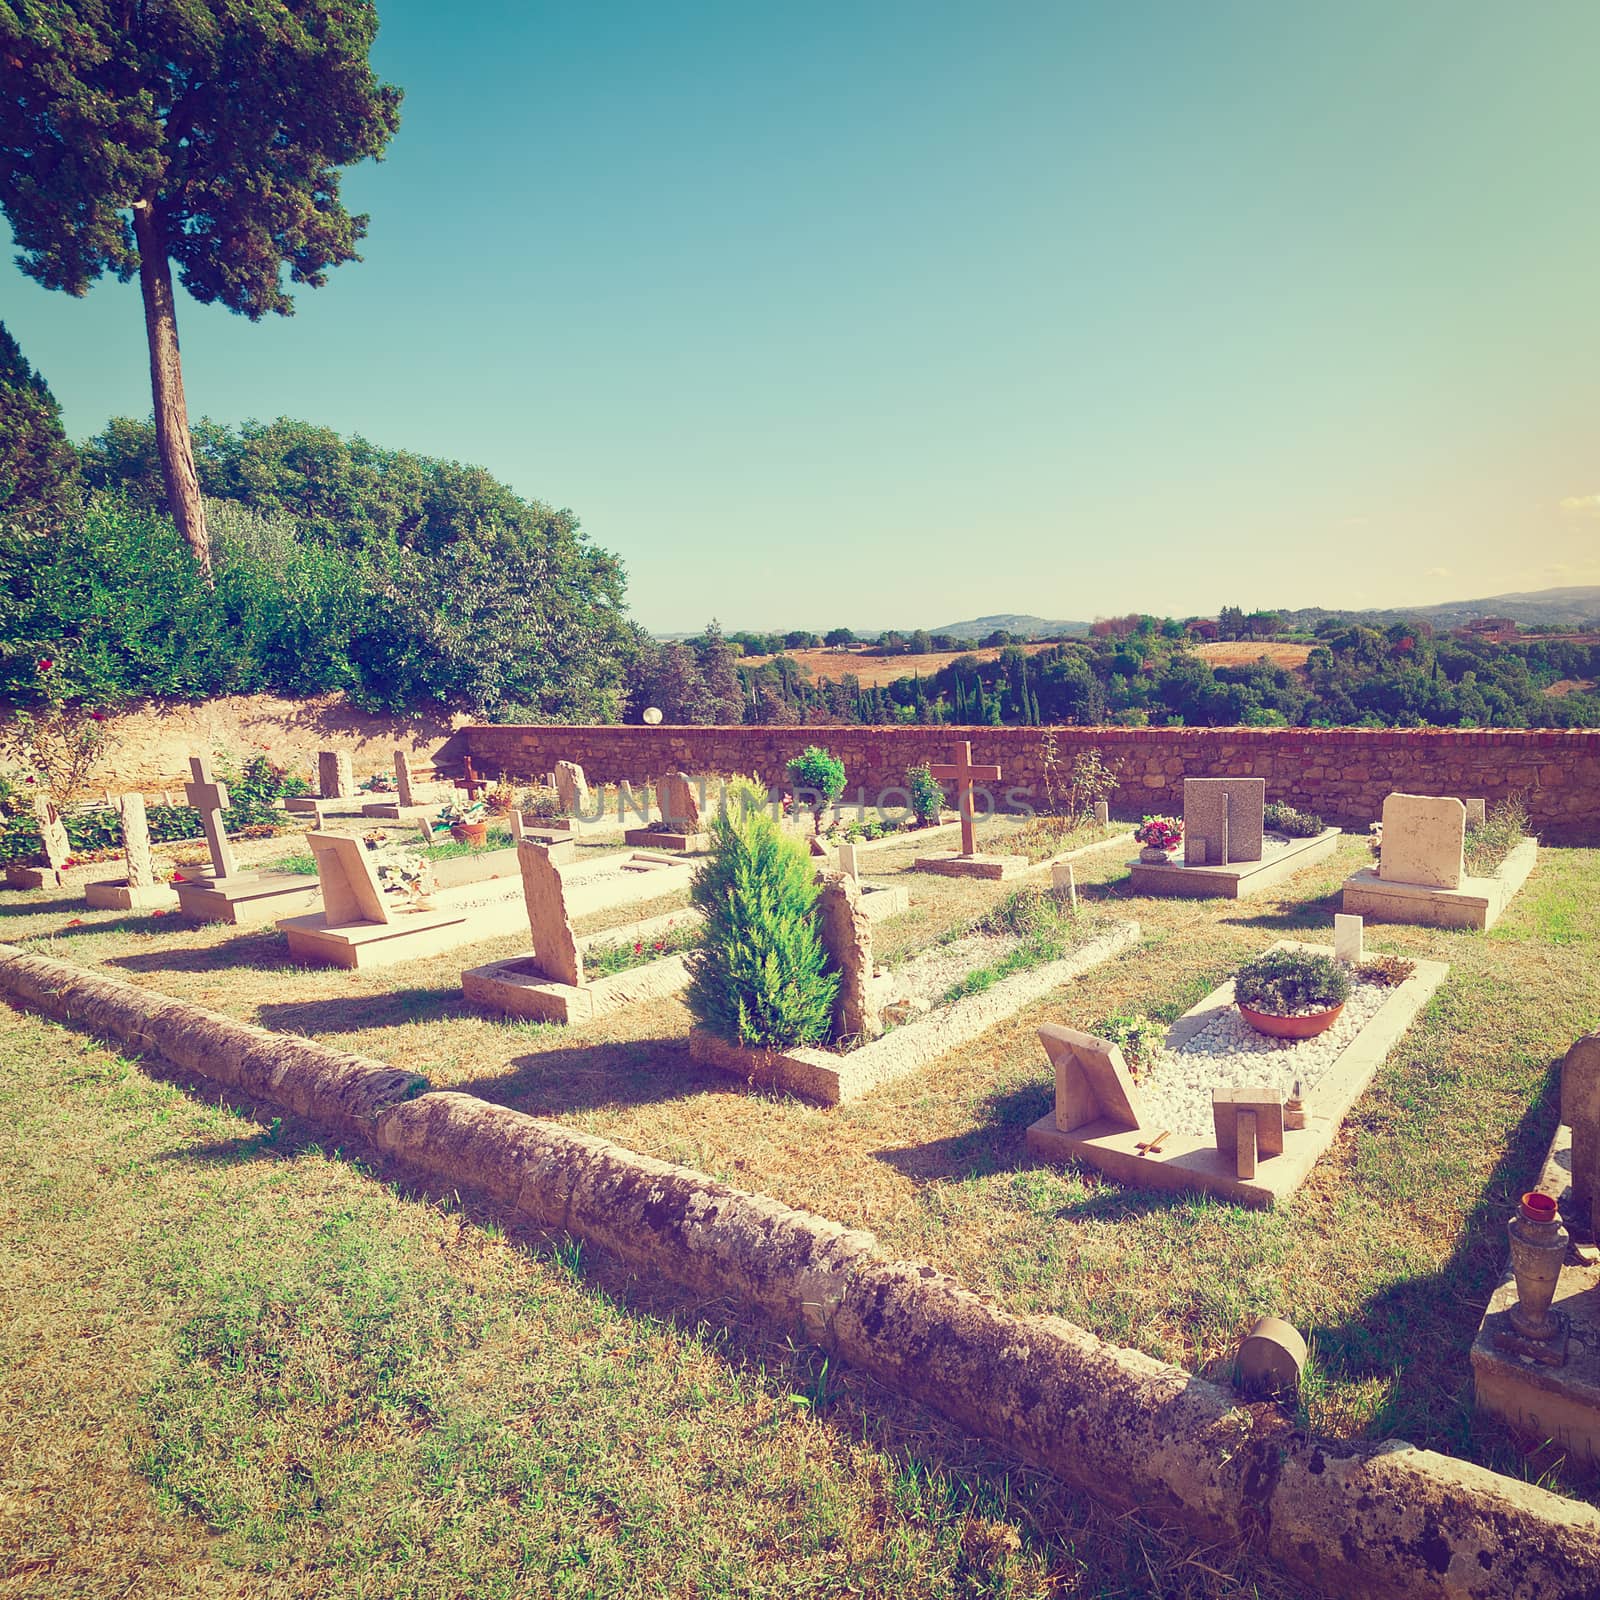 Churchyard on the Background of the Tuscan Landscape at Sunset, Vintage Style Toned Picture